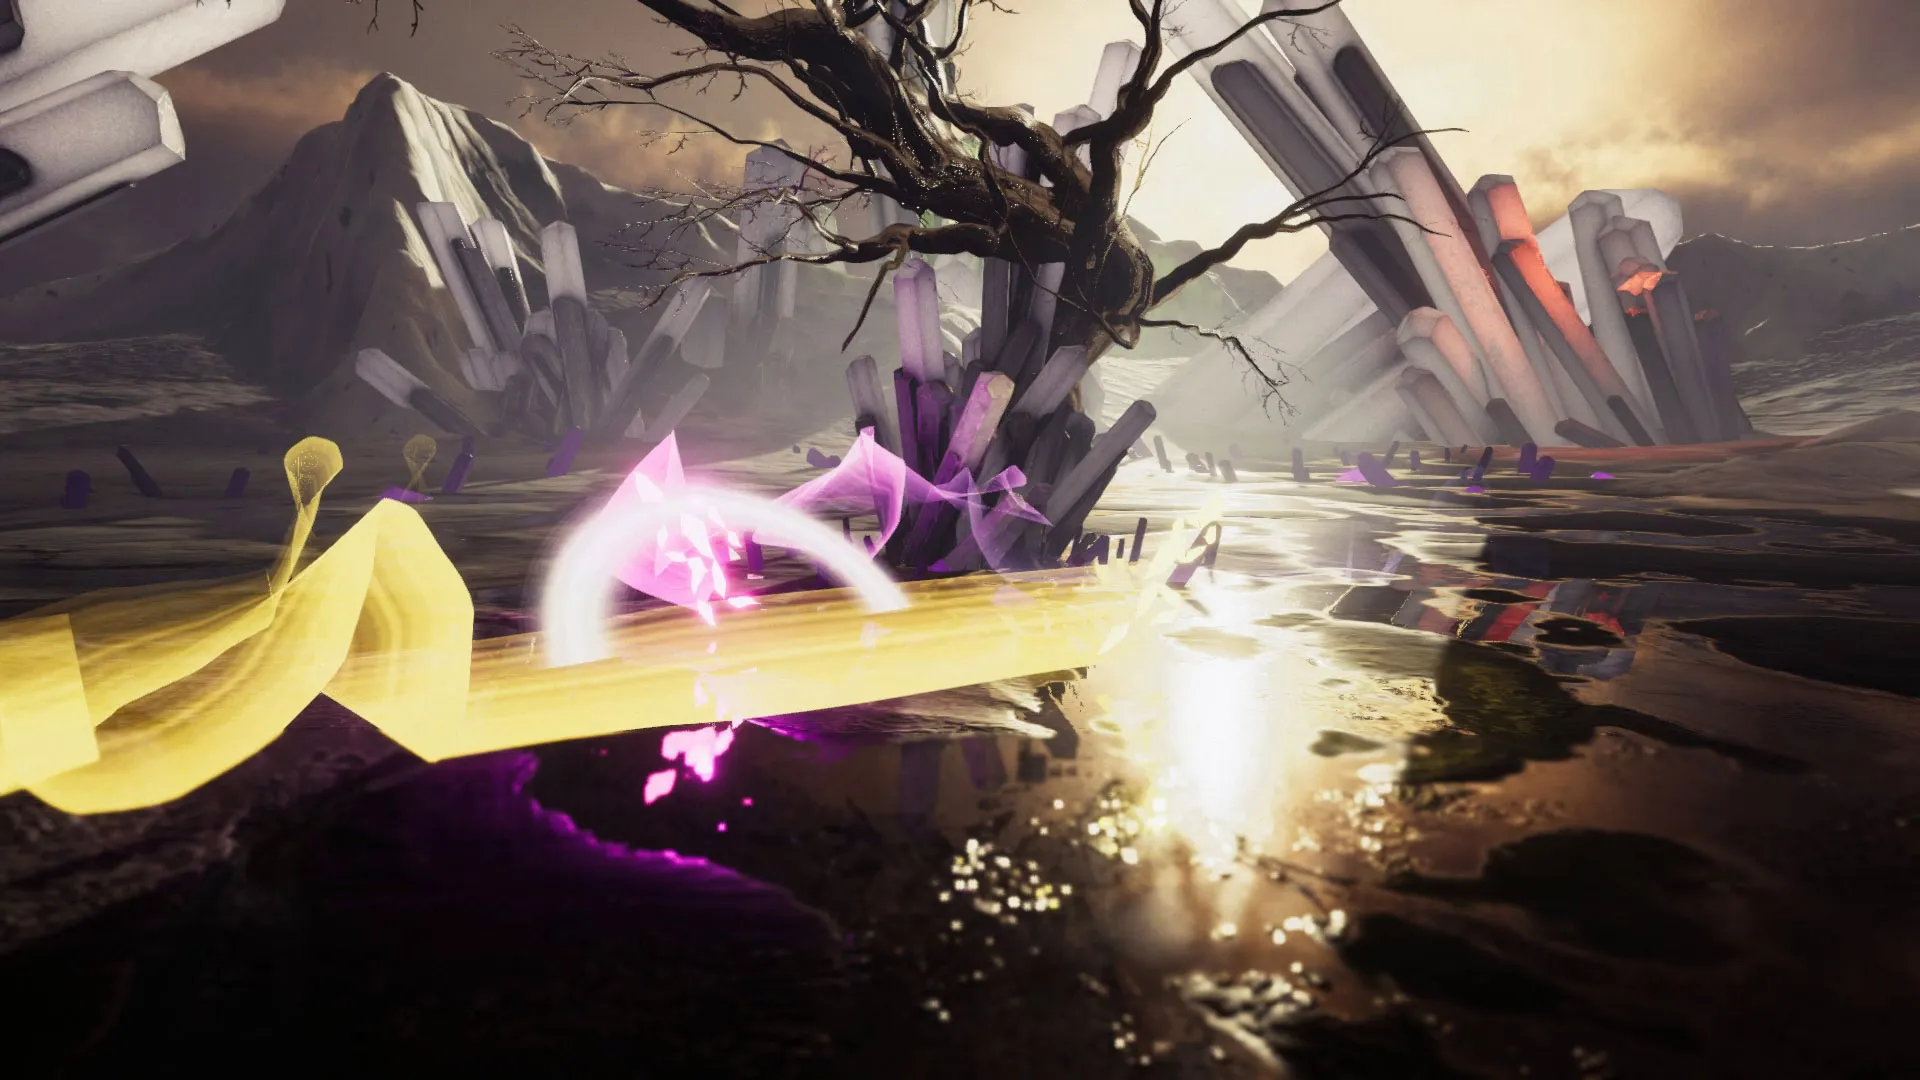 A neon yellow character dashing away from the magenta one, surrounded by giant crystals and a dead tree.